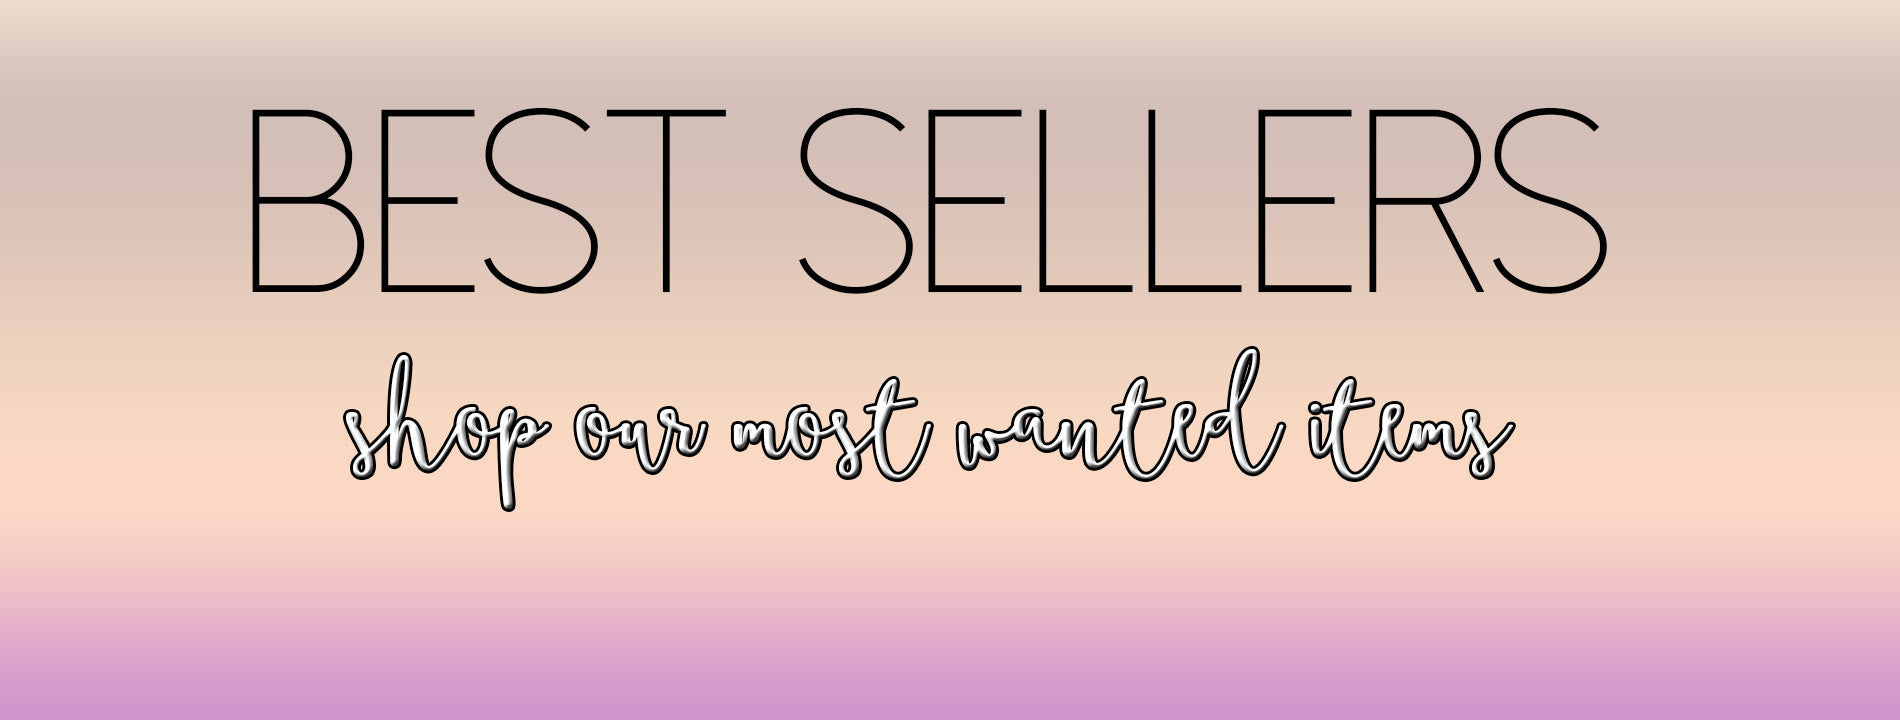 SWANK Best Sellers-- Shop Our Top Selling Items